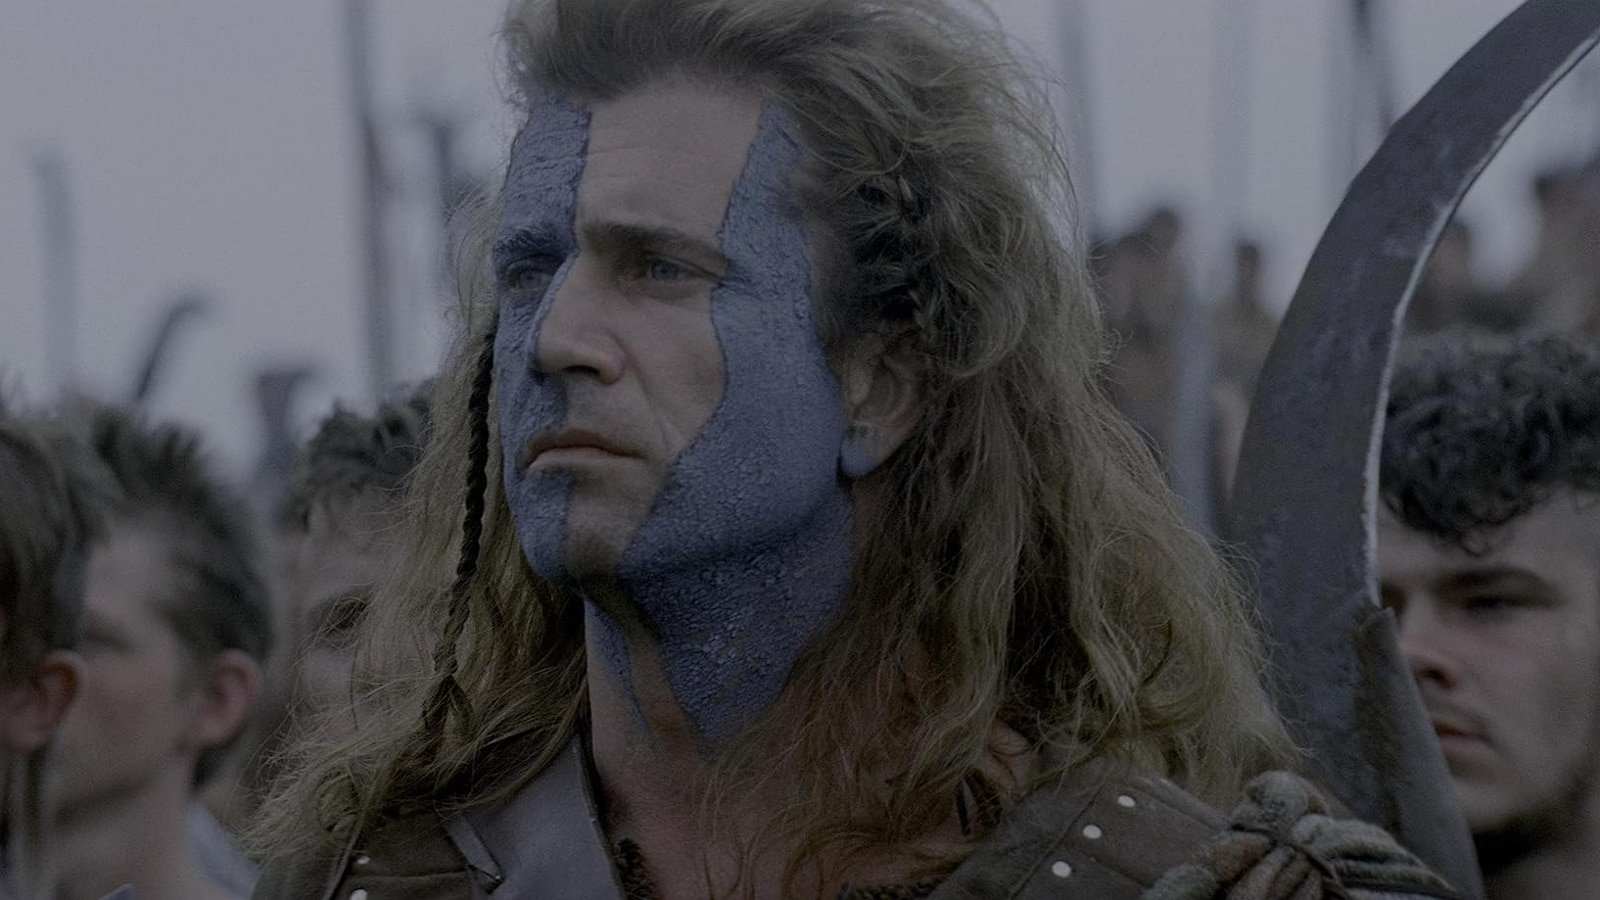 <p>Having grown tired of the autocratic rule of England, the people of Scotland rally around the noble warrior William Wallace (Mel Gibson), who leads an army against the mighty forces of England’s King Edward I (Patrick McGoohan).</p><p>Though its presentation of historical events is shockingly inaccurate and oversimplified for dramatic effect, <em>Braveheart</em> continues to be the best film ever directed by Gibson, as well as containing his greatest performance as an actor. The brutality of the battle scenes alone are worthy of praise, as is the movie’s exploration of freedom in the face of tyrannical authoritarianism.</p>